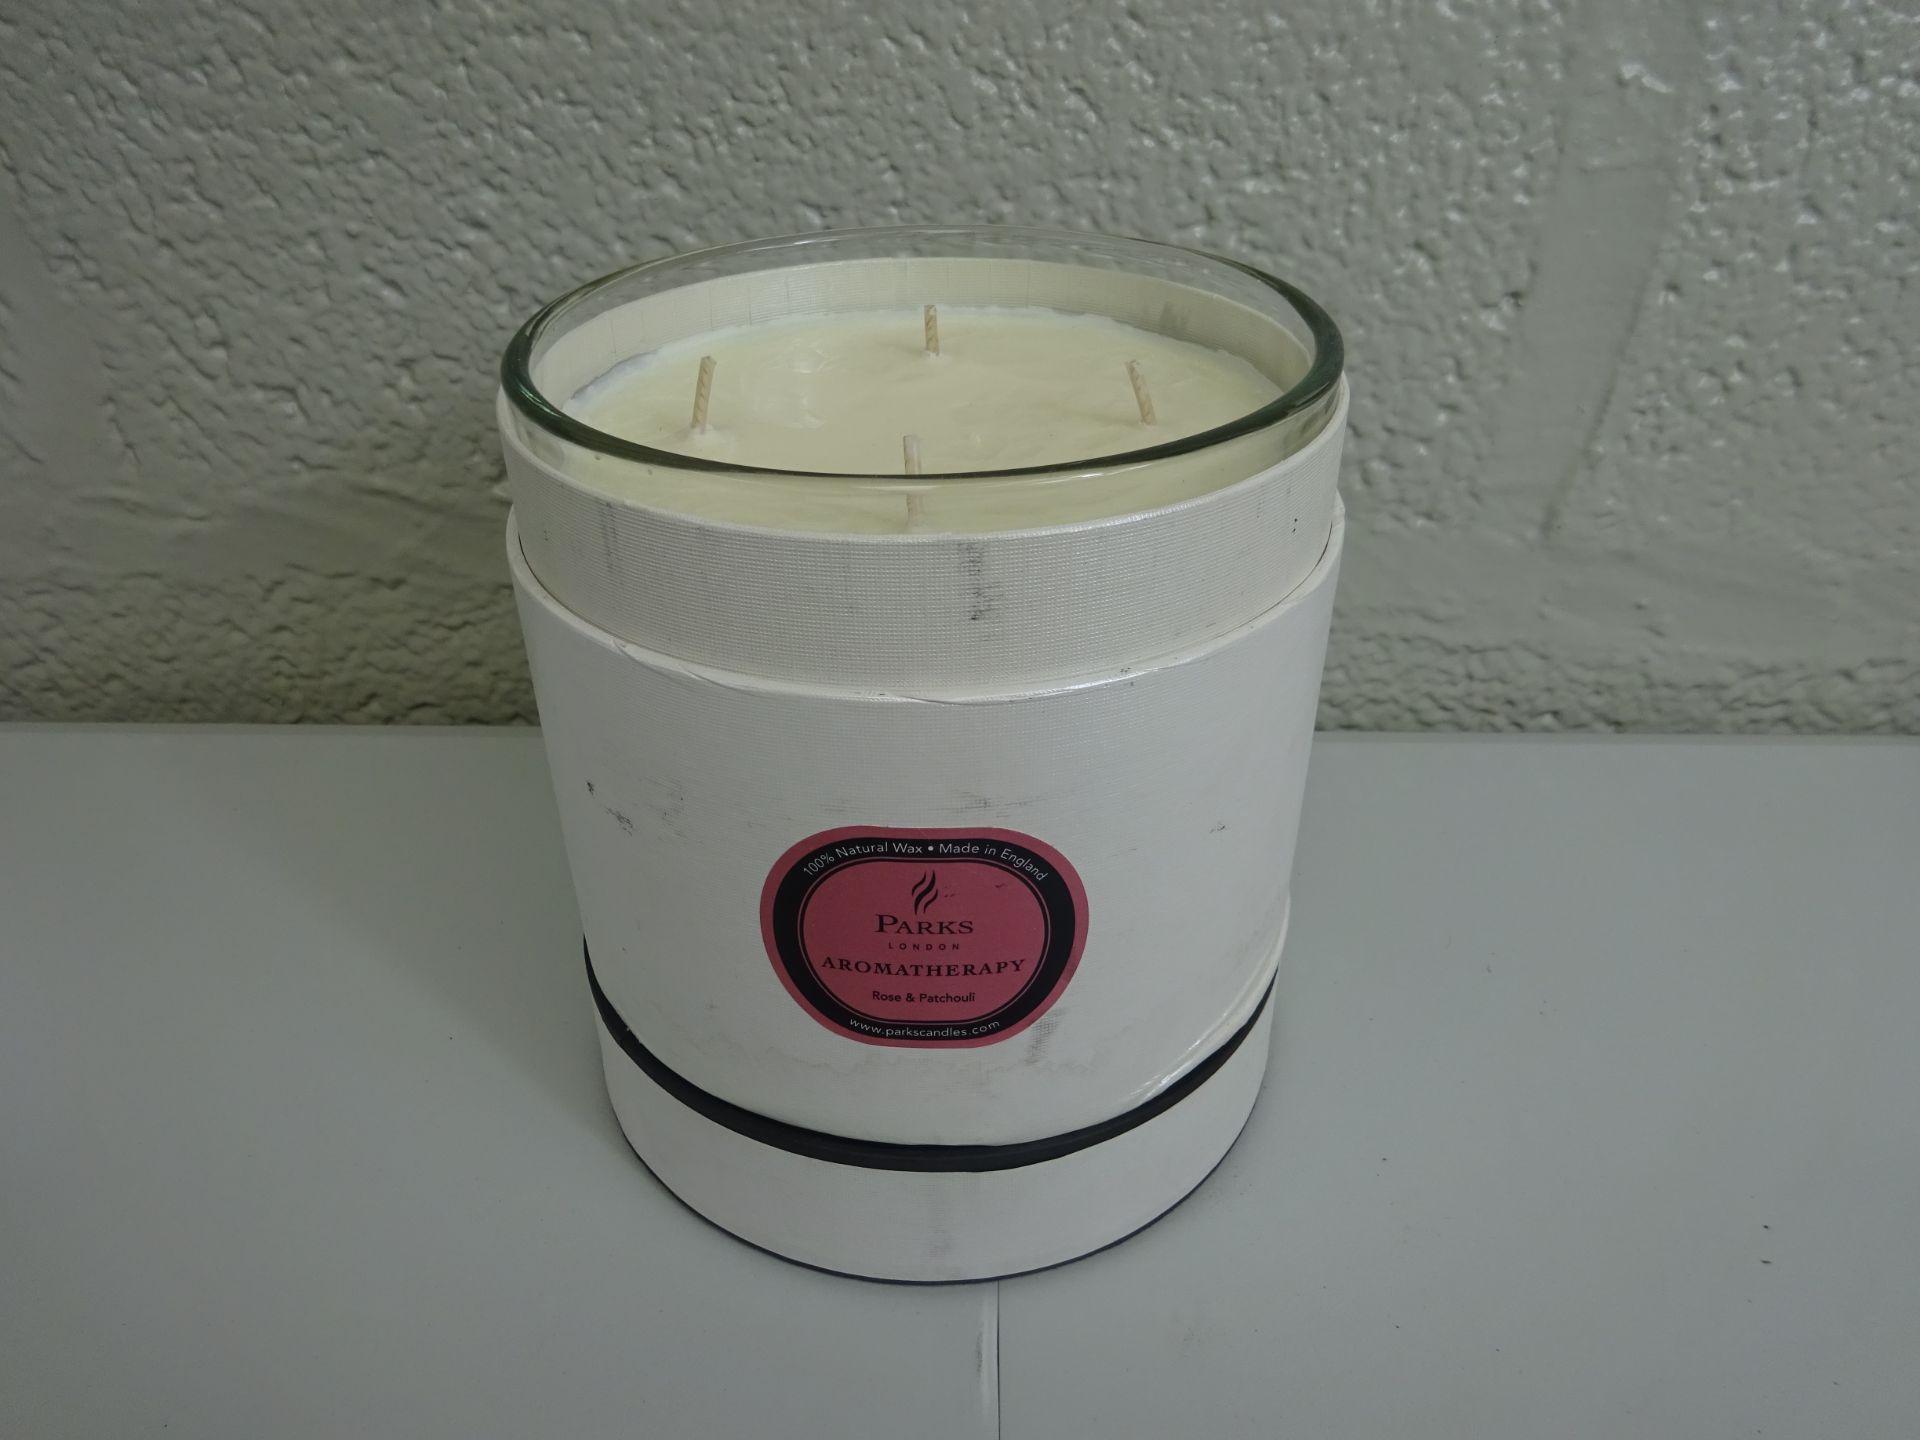 Parks London Rose & patchuoli scented candle - RRP £144.00